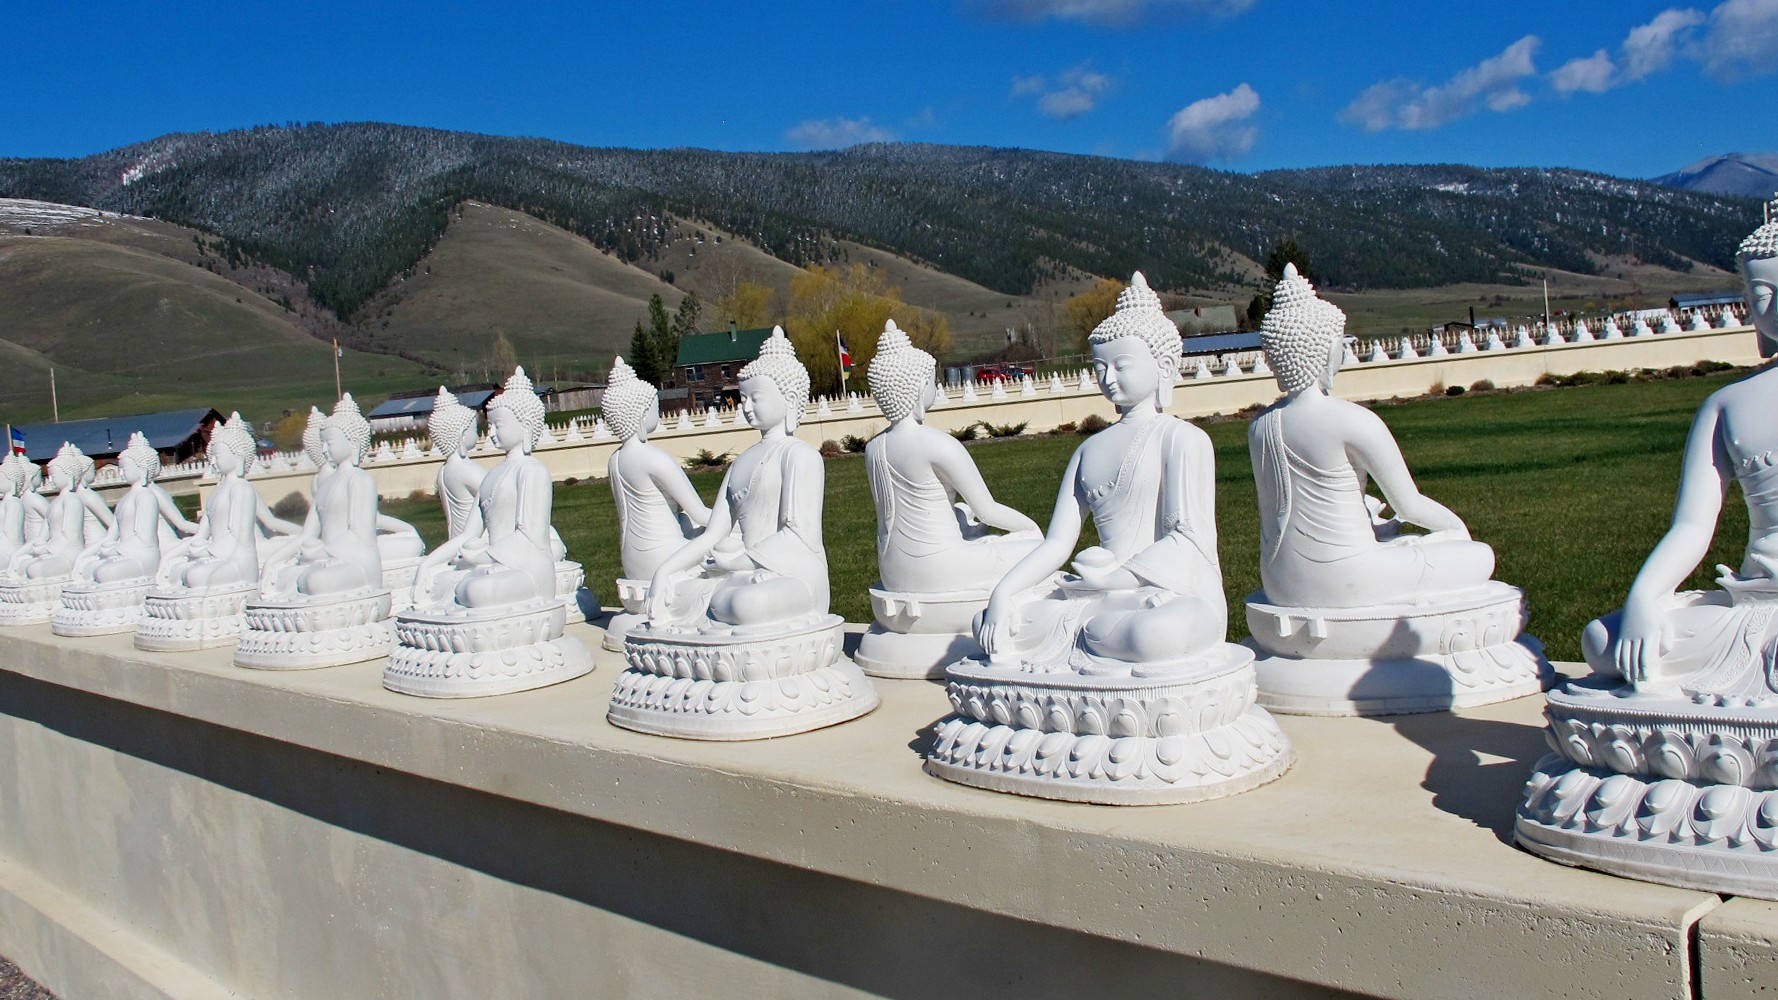 Garden Of One Thousand Buddhas Arlee Mt Roadside Attractions